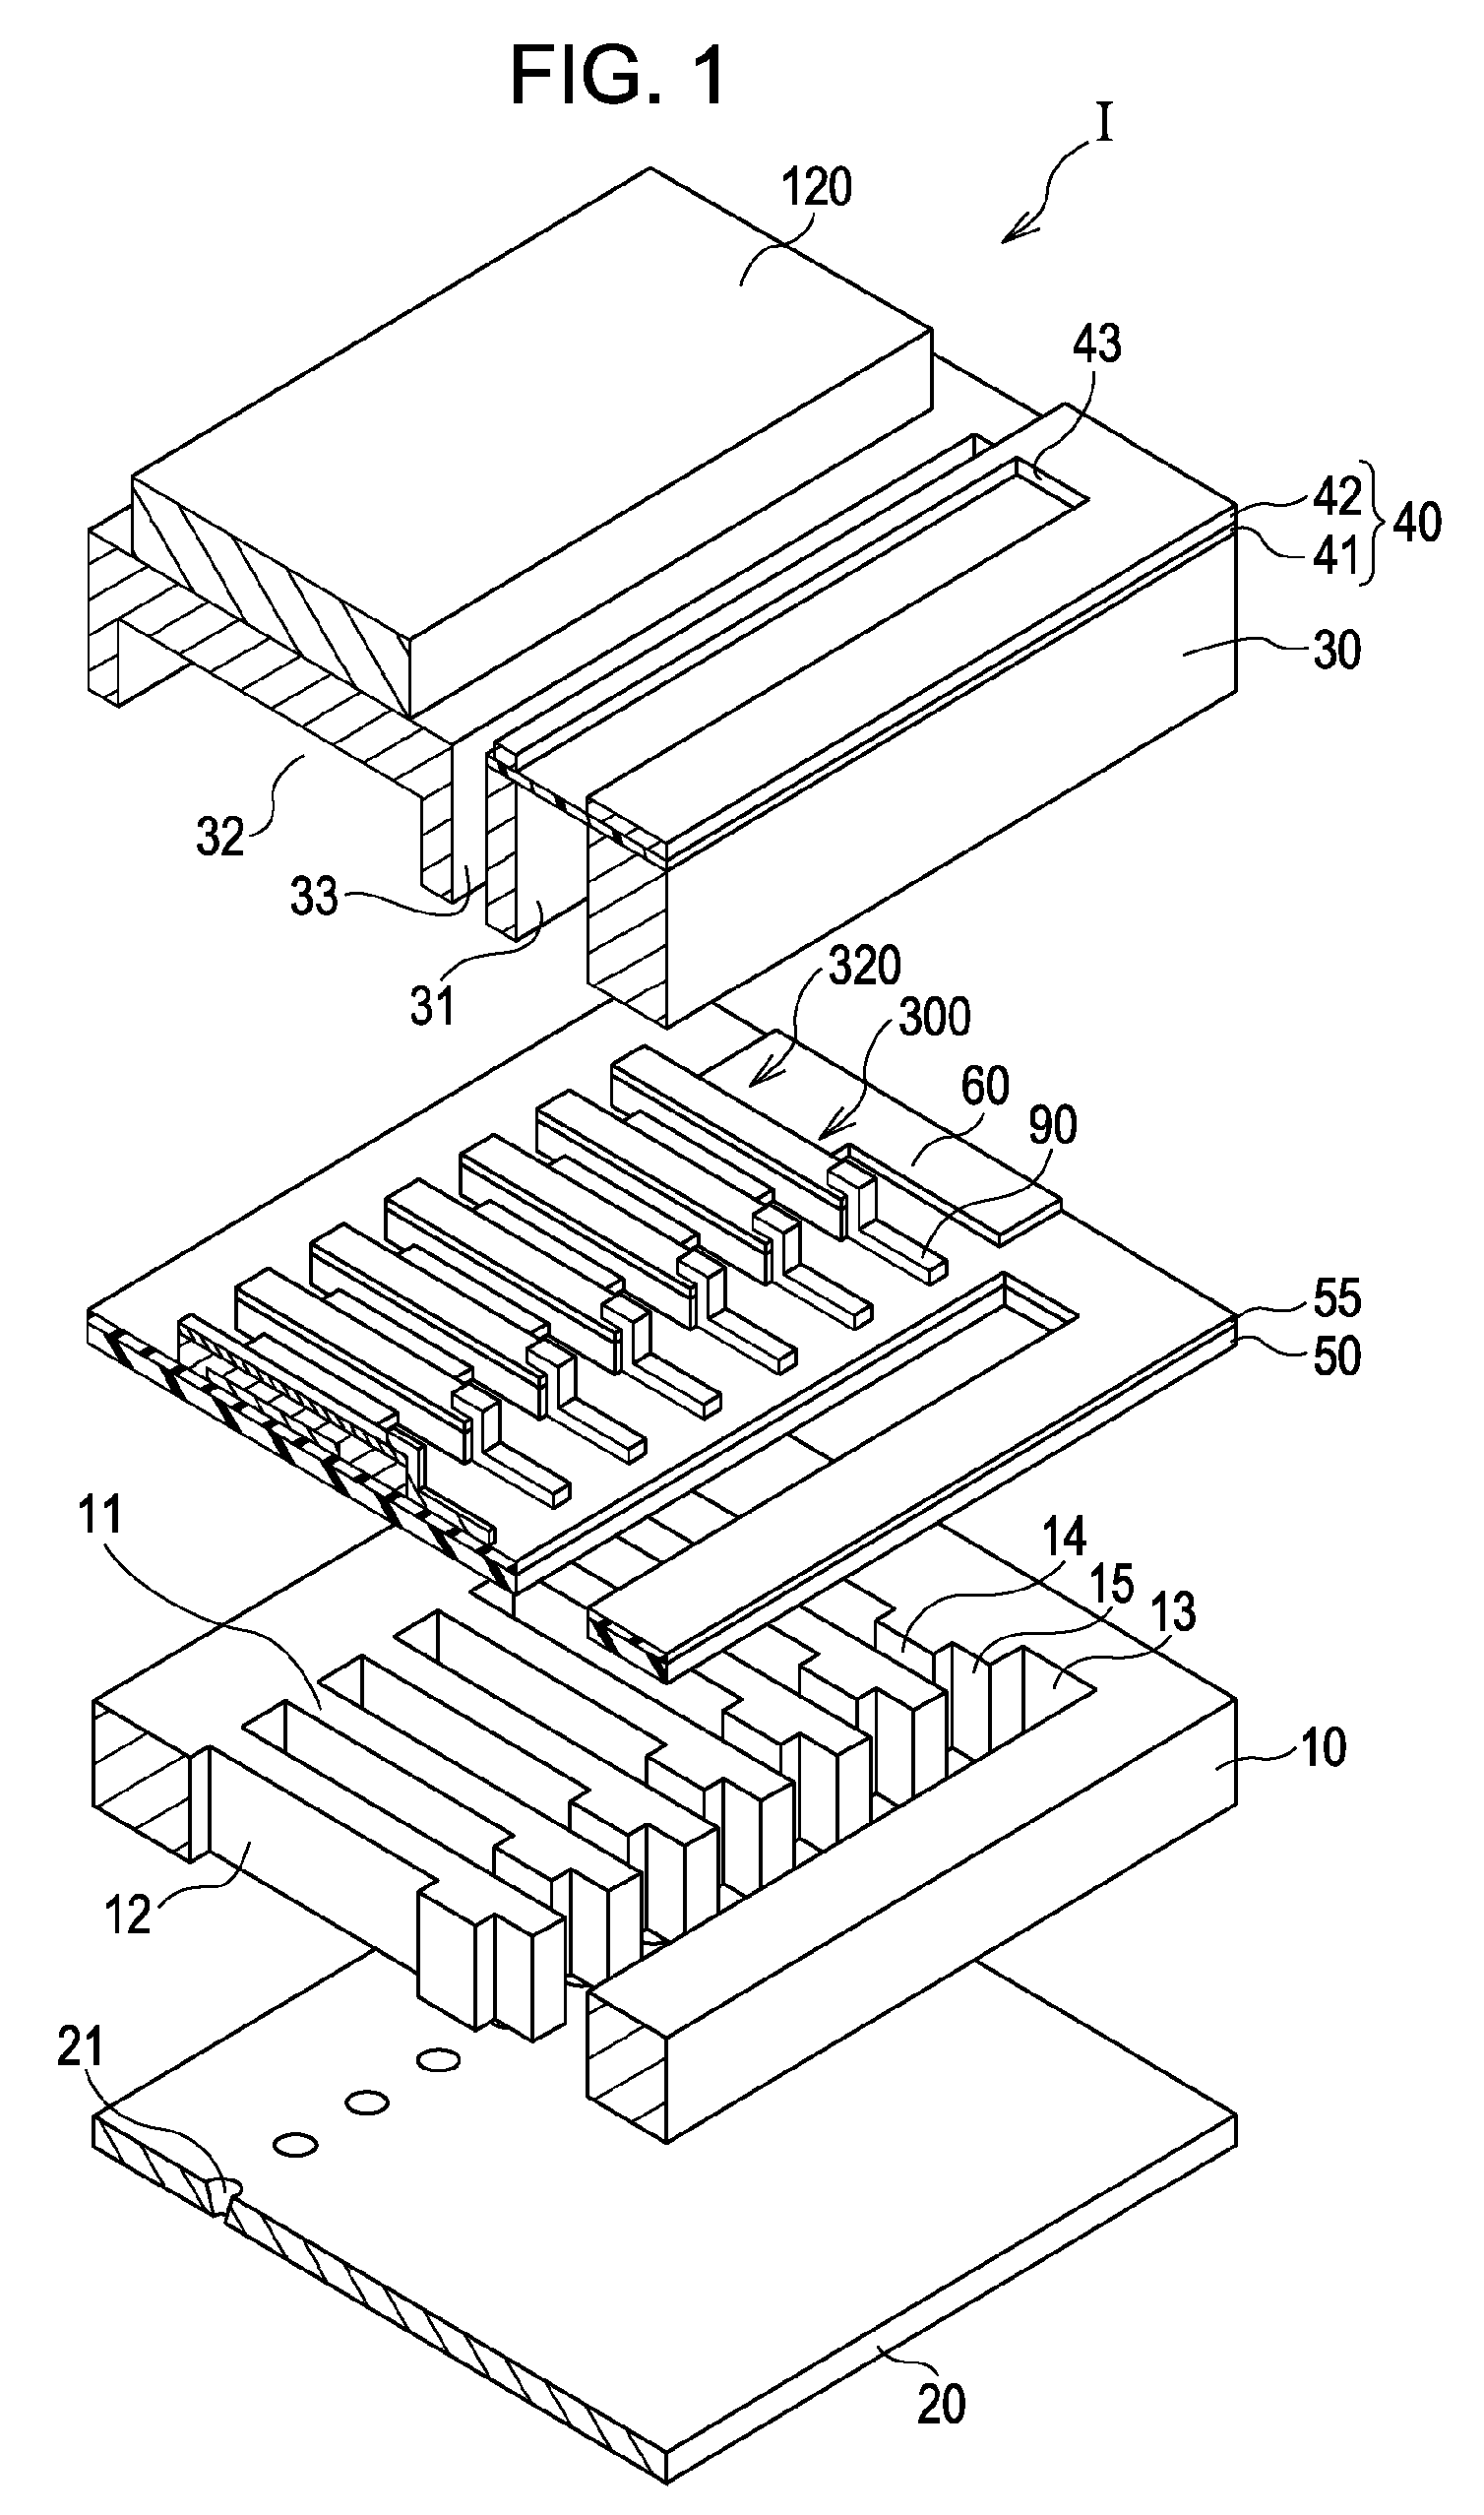 Liquid-ejecting head, liquid-ejecting apparatus, and piezoelectric transducer